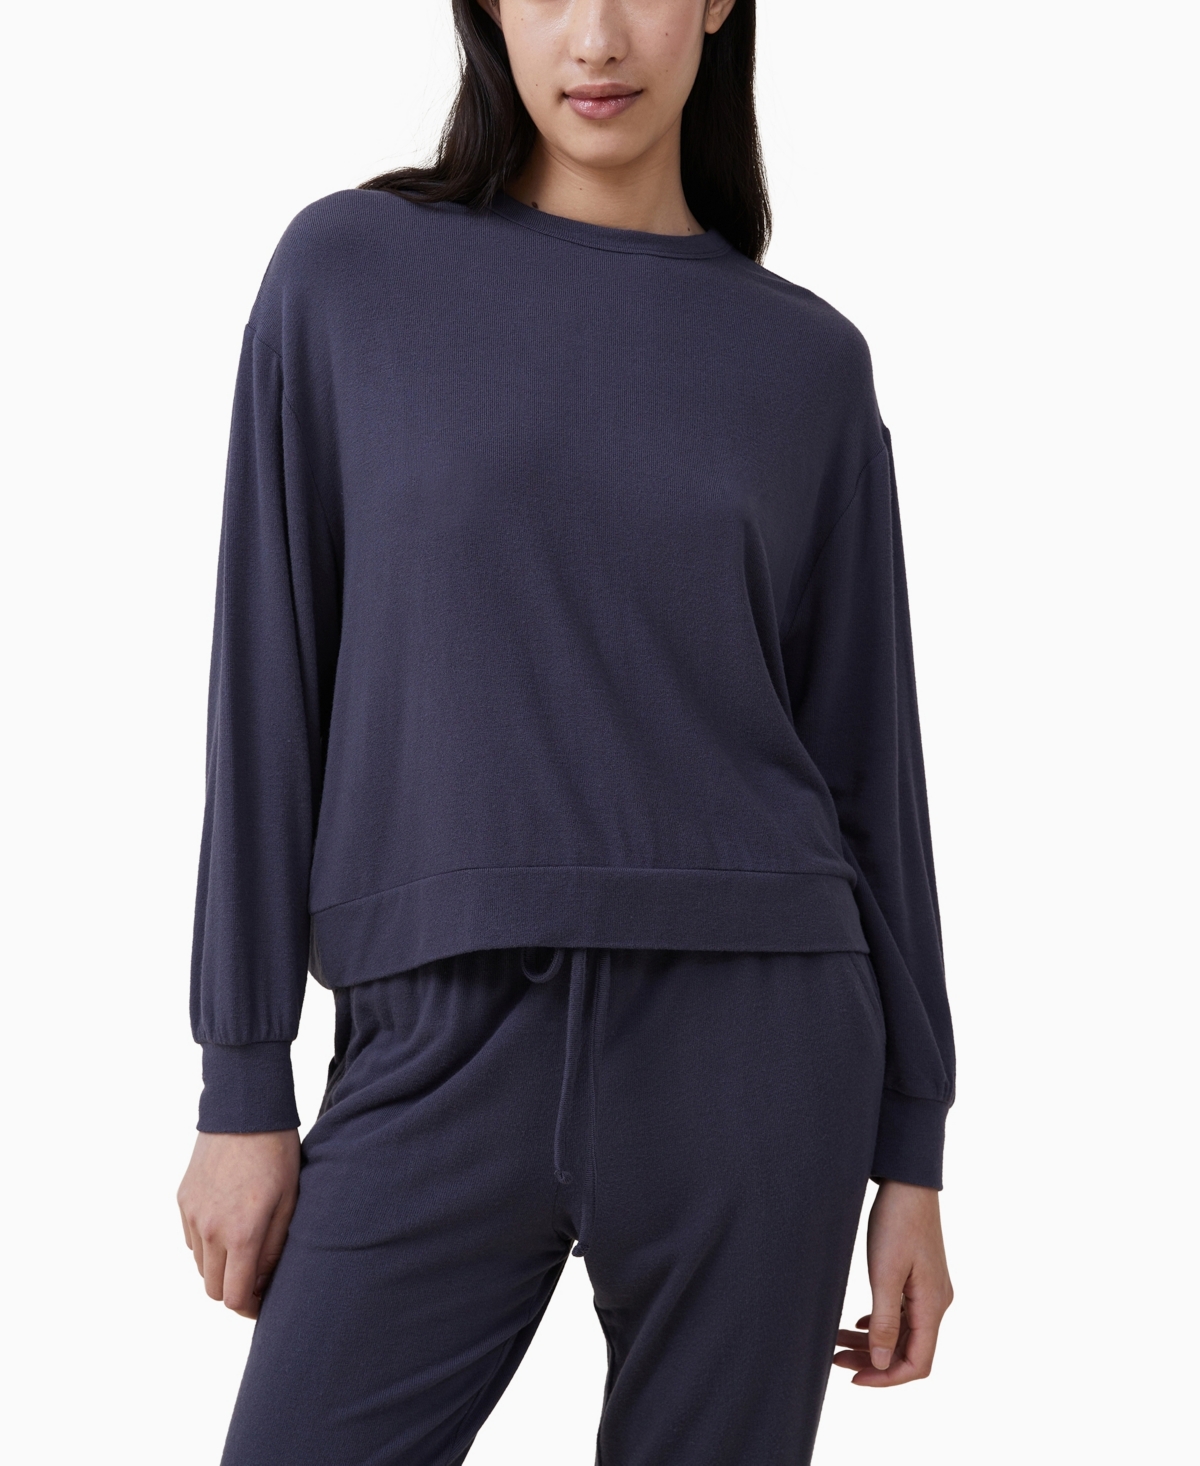 Cotton On Women's Super Soft Long Sleeve Crew Neck Top In Element Blue